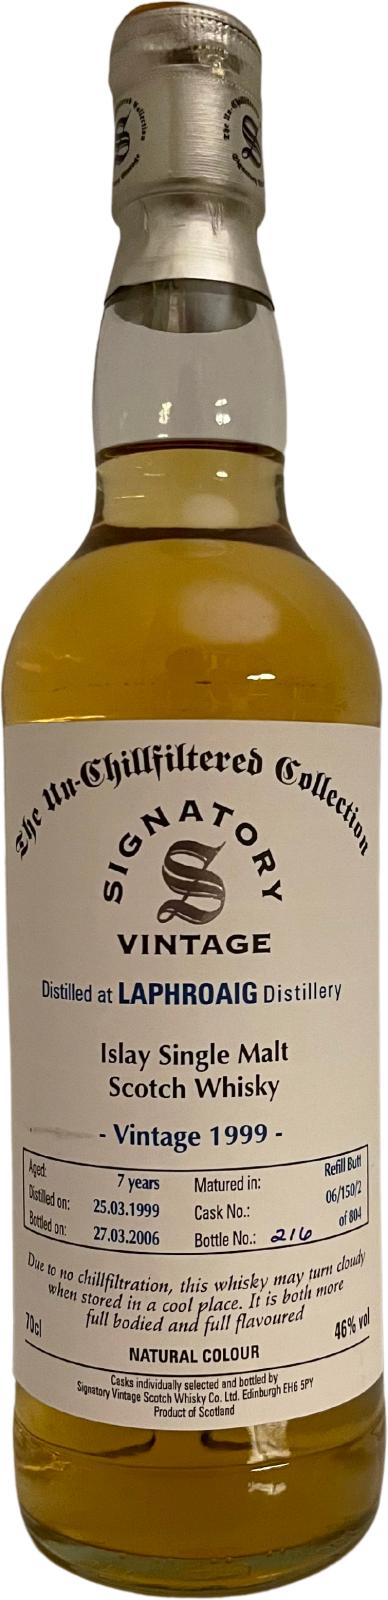 Laphroaig 1999 SV The Un-Chillfiltered Collection Refill Butt 06 150 2 06/150/2 46% 700ml